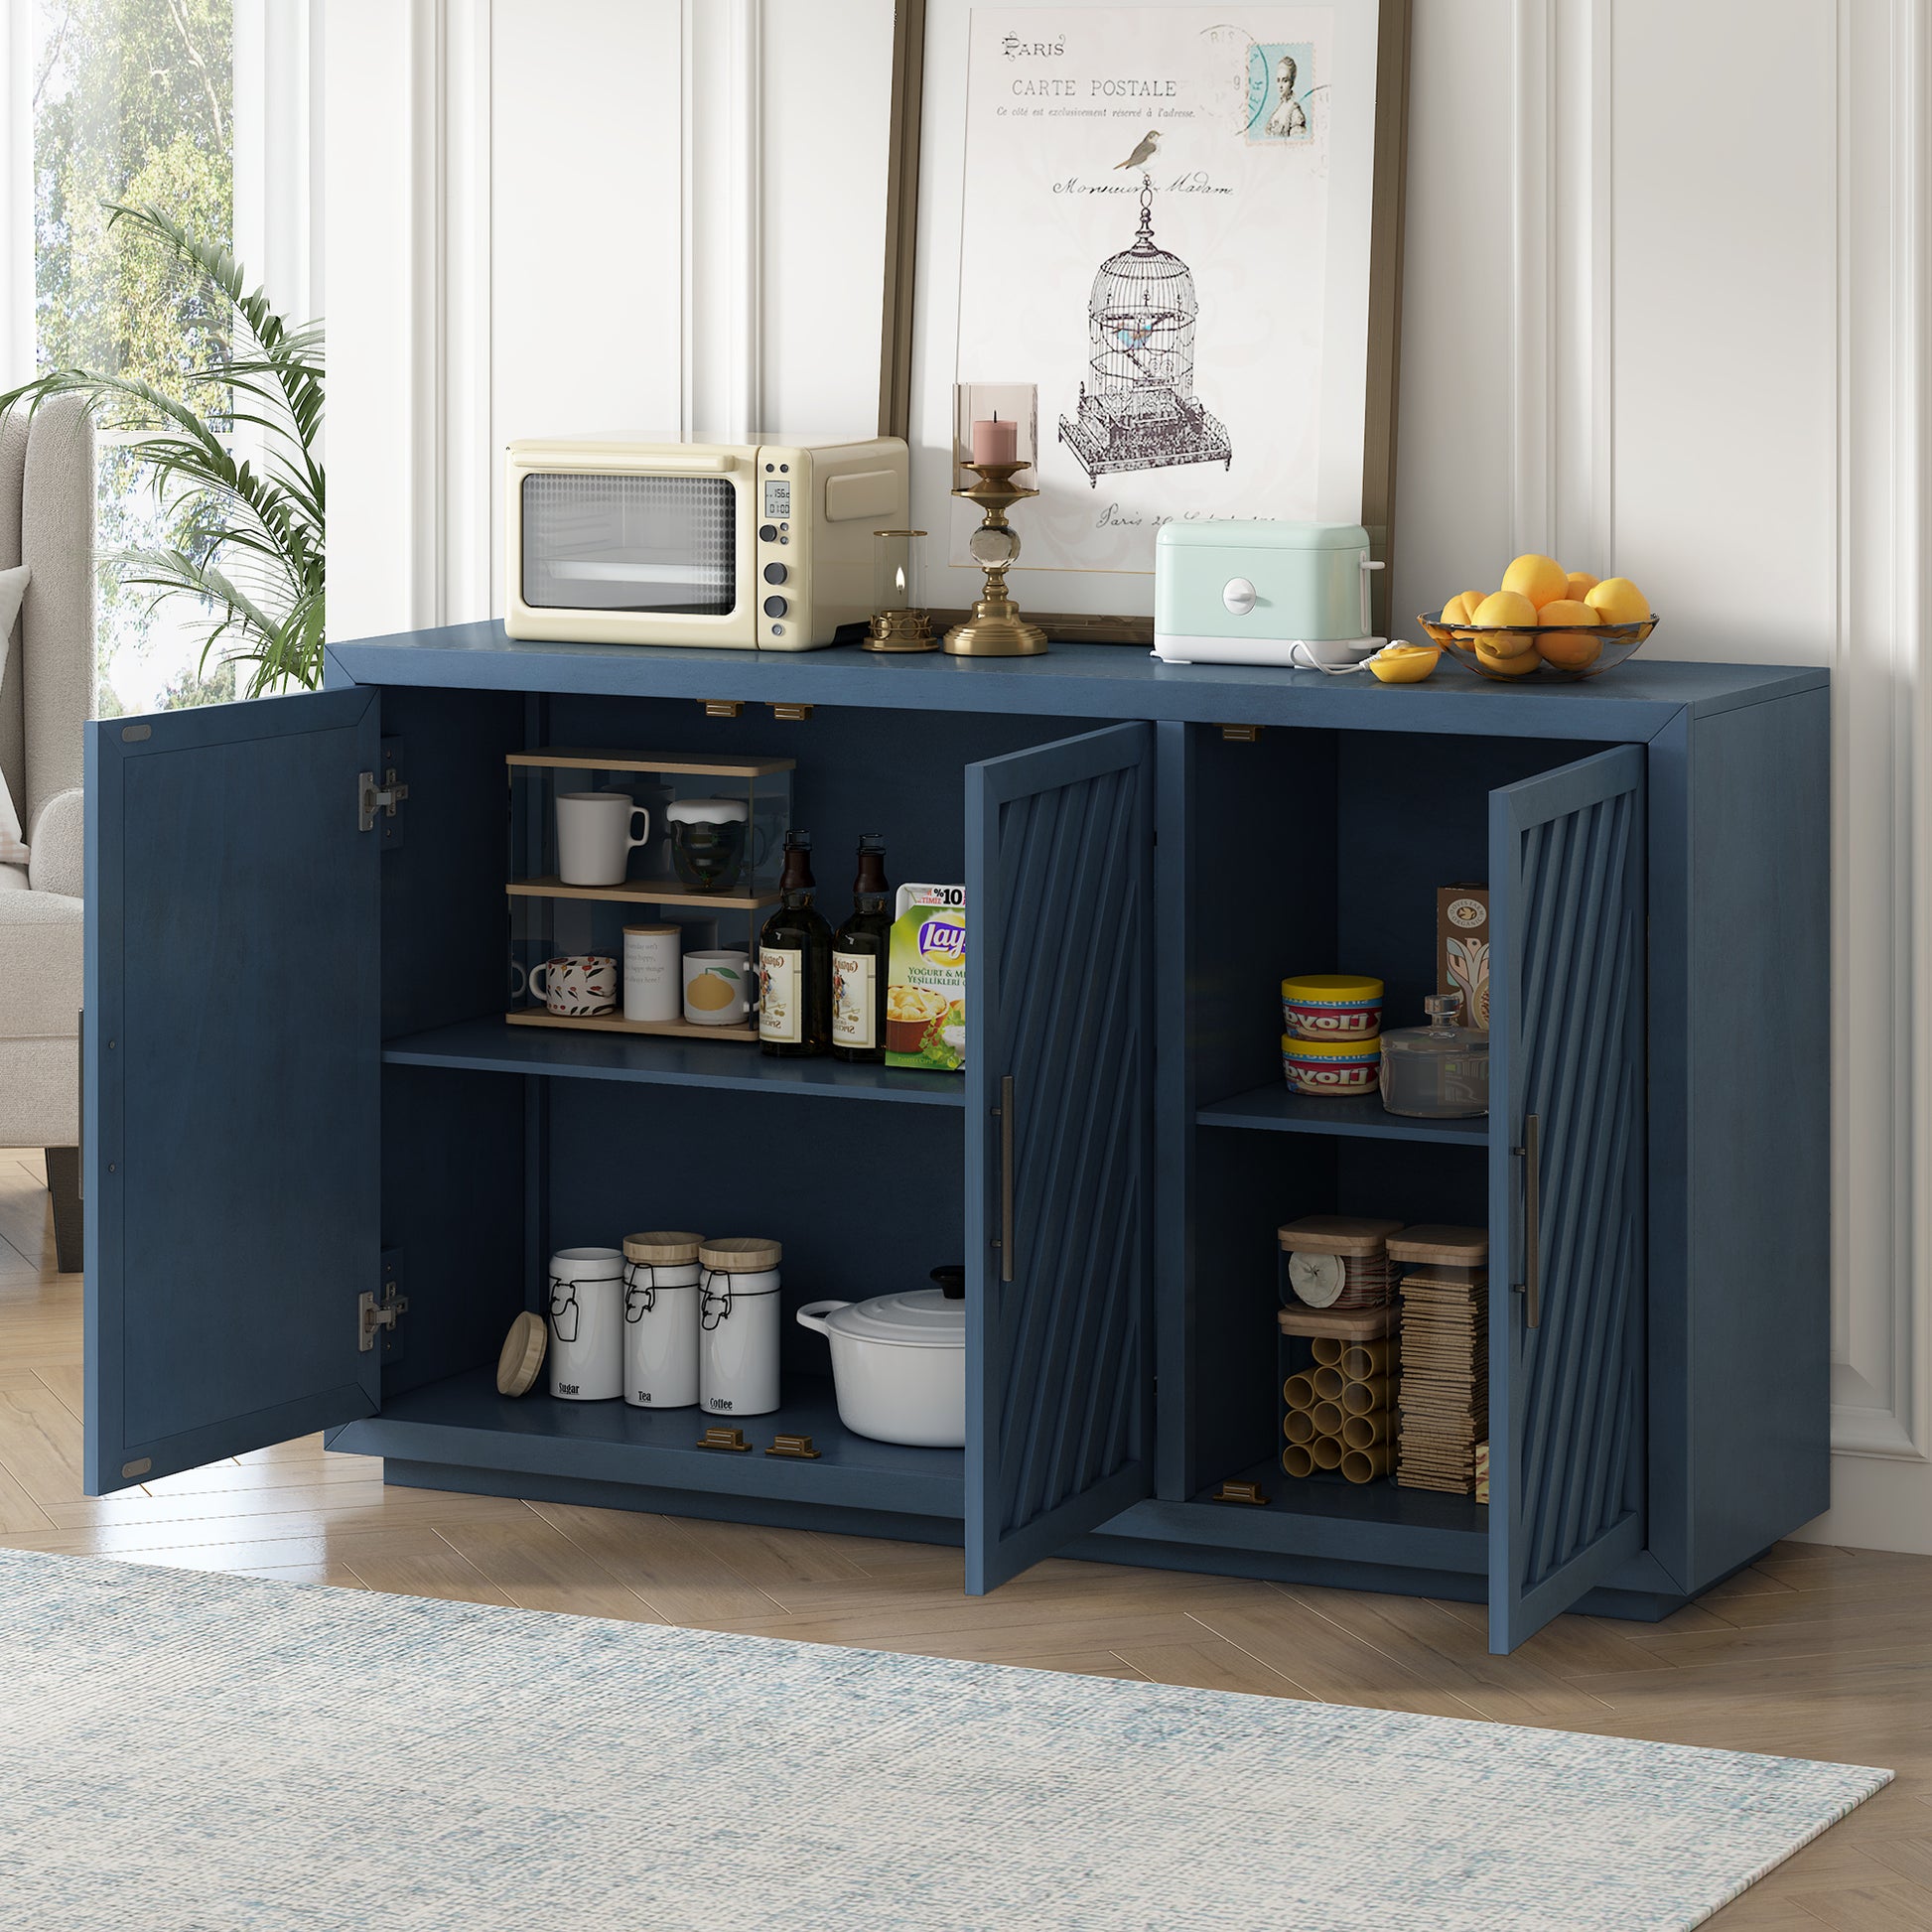 3 Door Large Storage Retro Sideboard with antique blue-solid wood+mdf